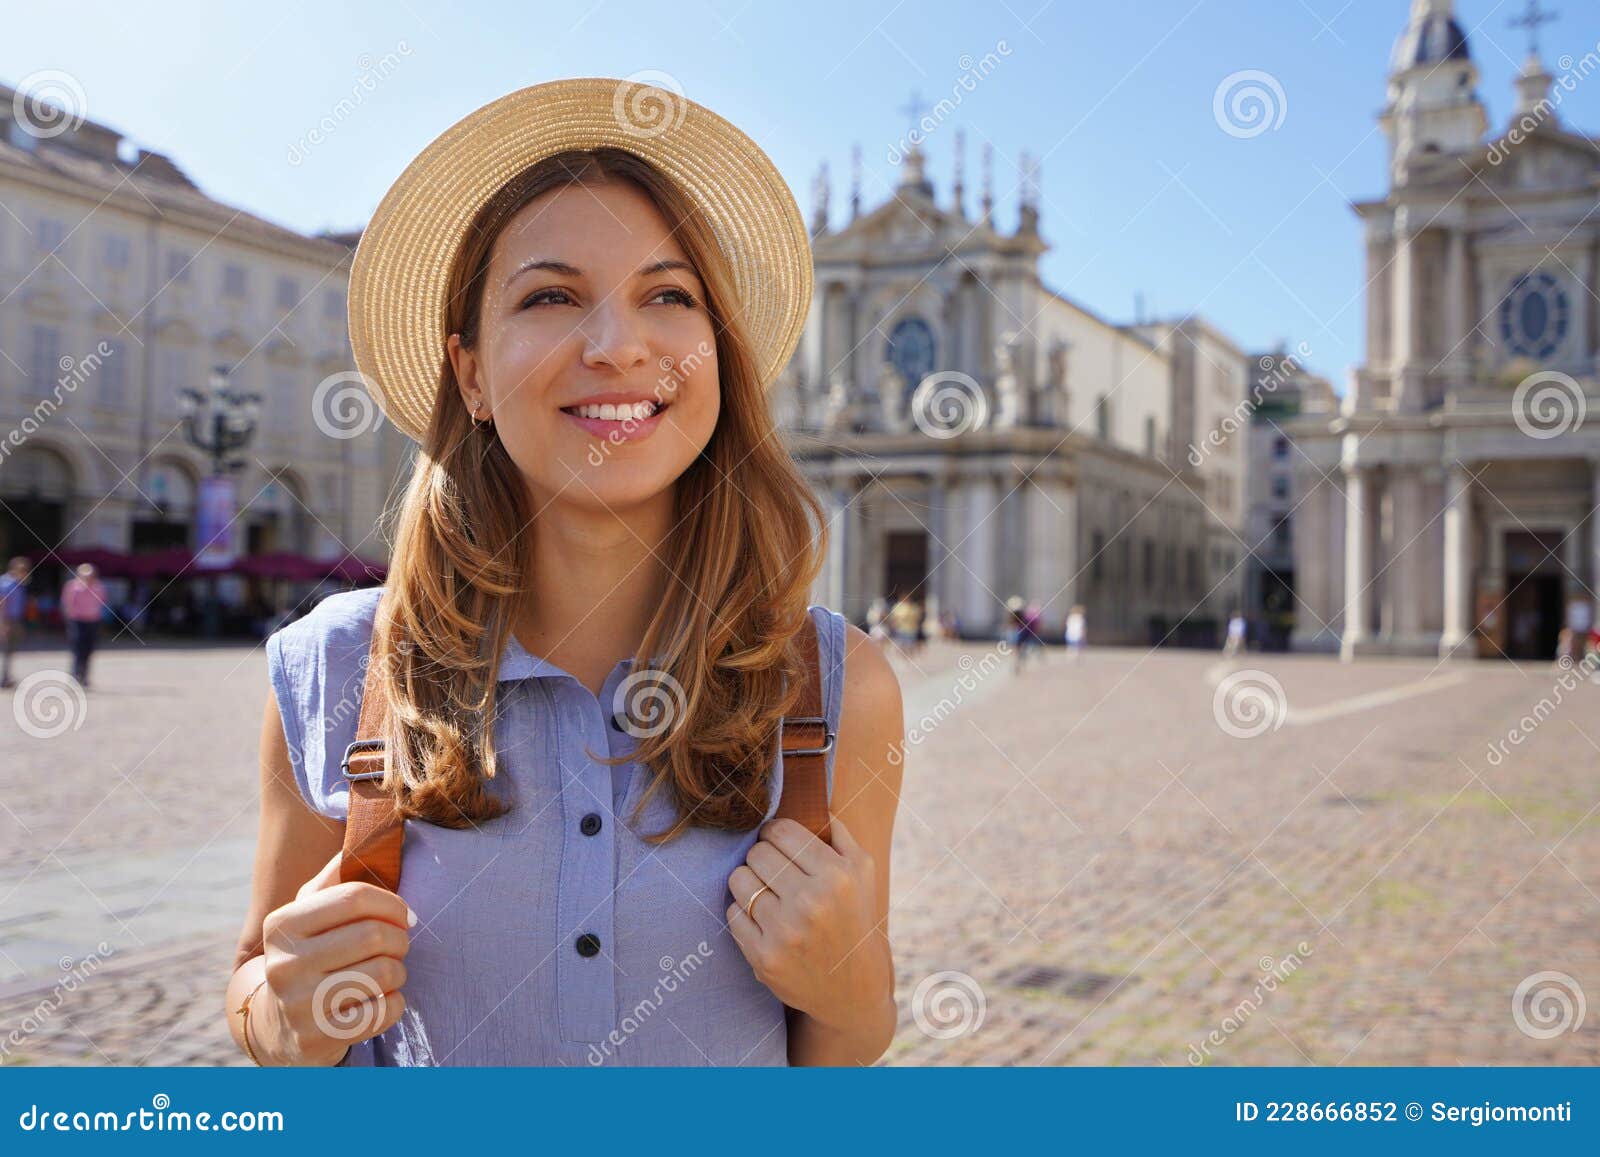 portrait of beautiful tourist woman in piazza san carlo square in turin, italy. traveler girl with turin landmarks in italy